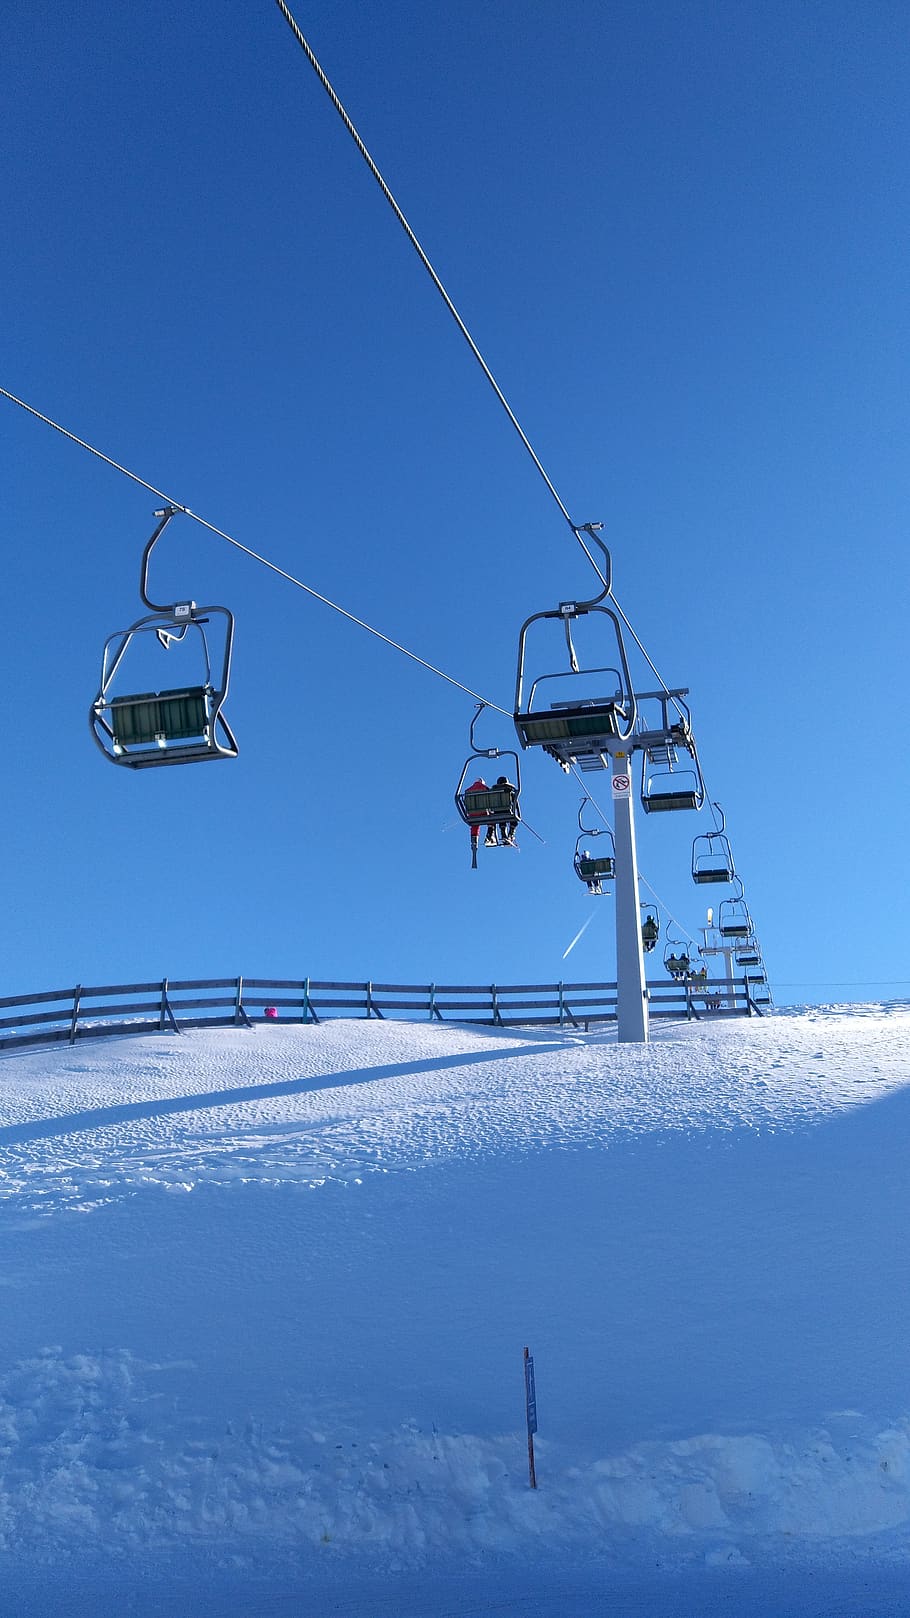 ski lift, cable car, winter, snow, lift, skiing, alpine, mountains, cold, sport